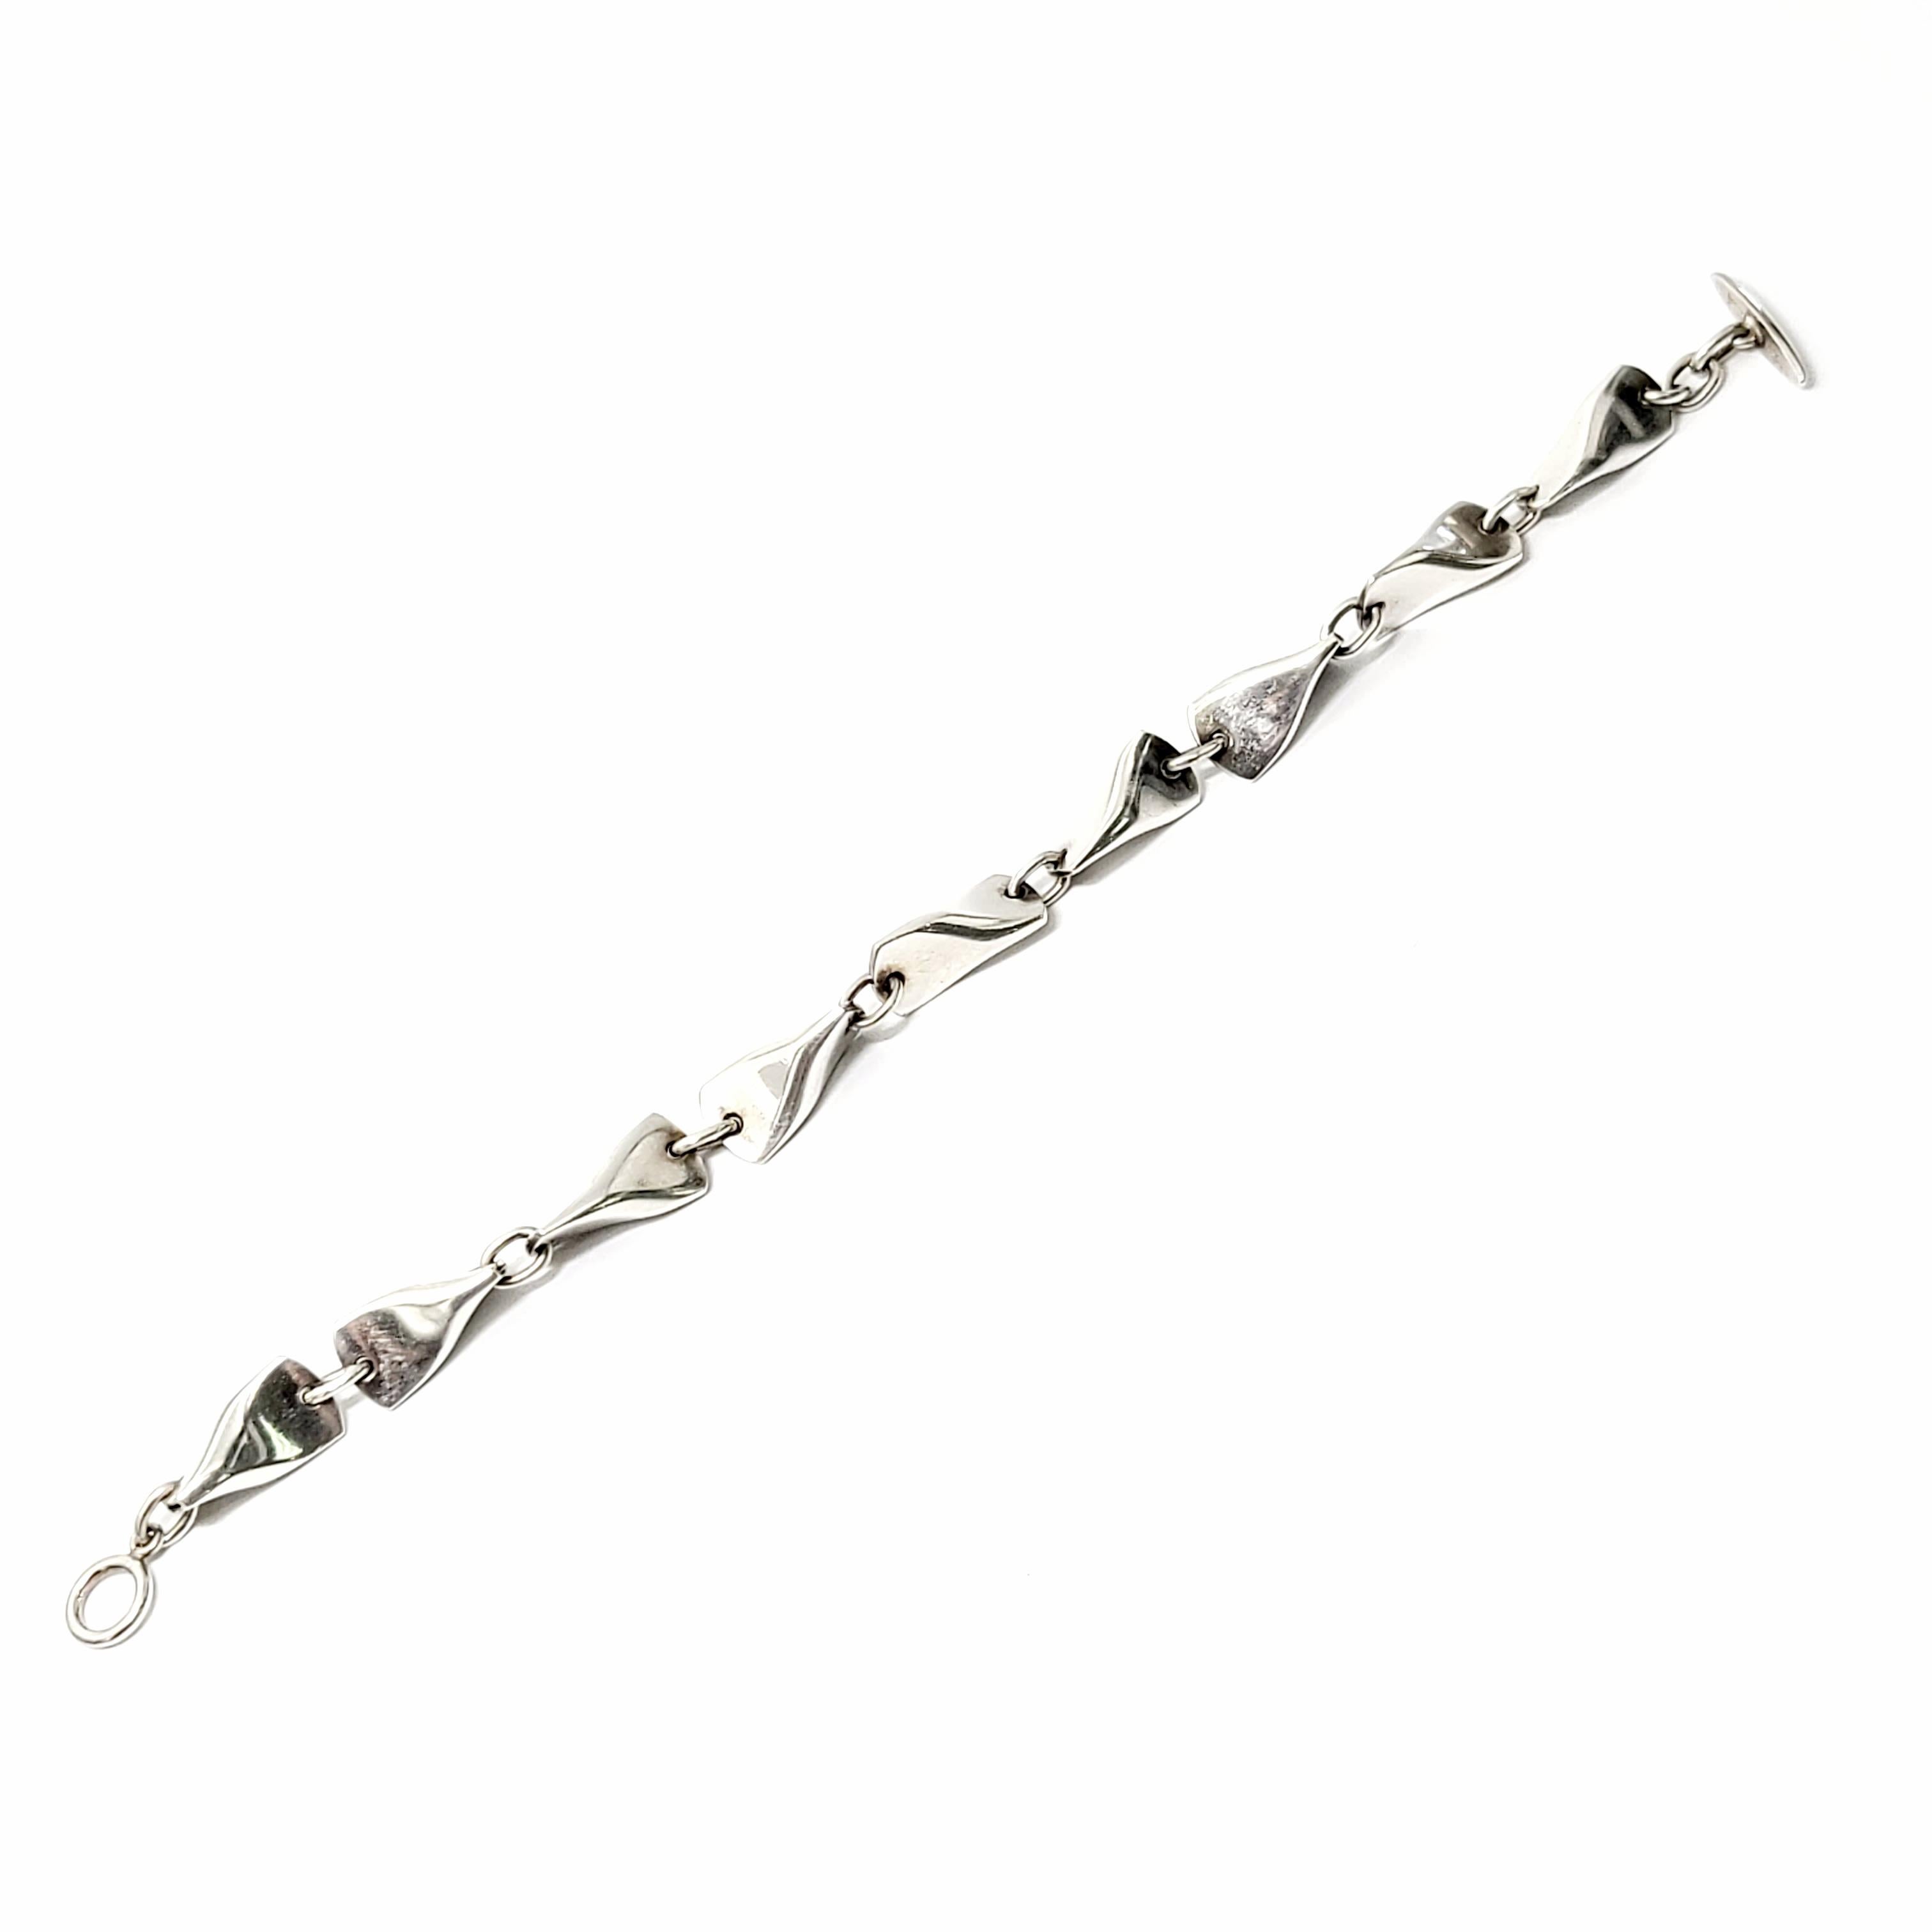 Vintage Georg Jensen sterling silver butterfly bracelet, pattern #104A.

Designed by Edvard Kindt-Larsen in 1955, this bracelet features pinched links with a toggle closure.

Measures 8